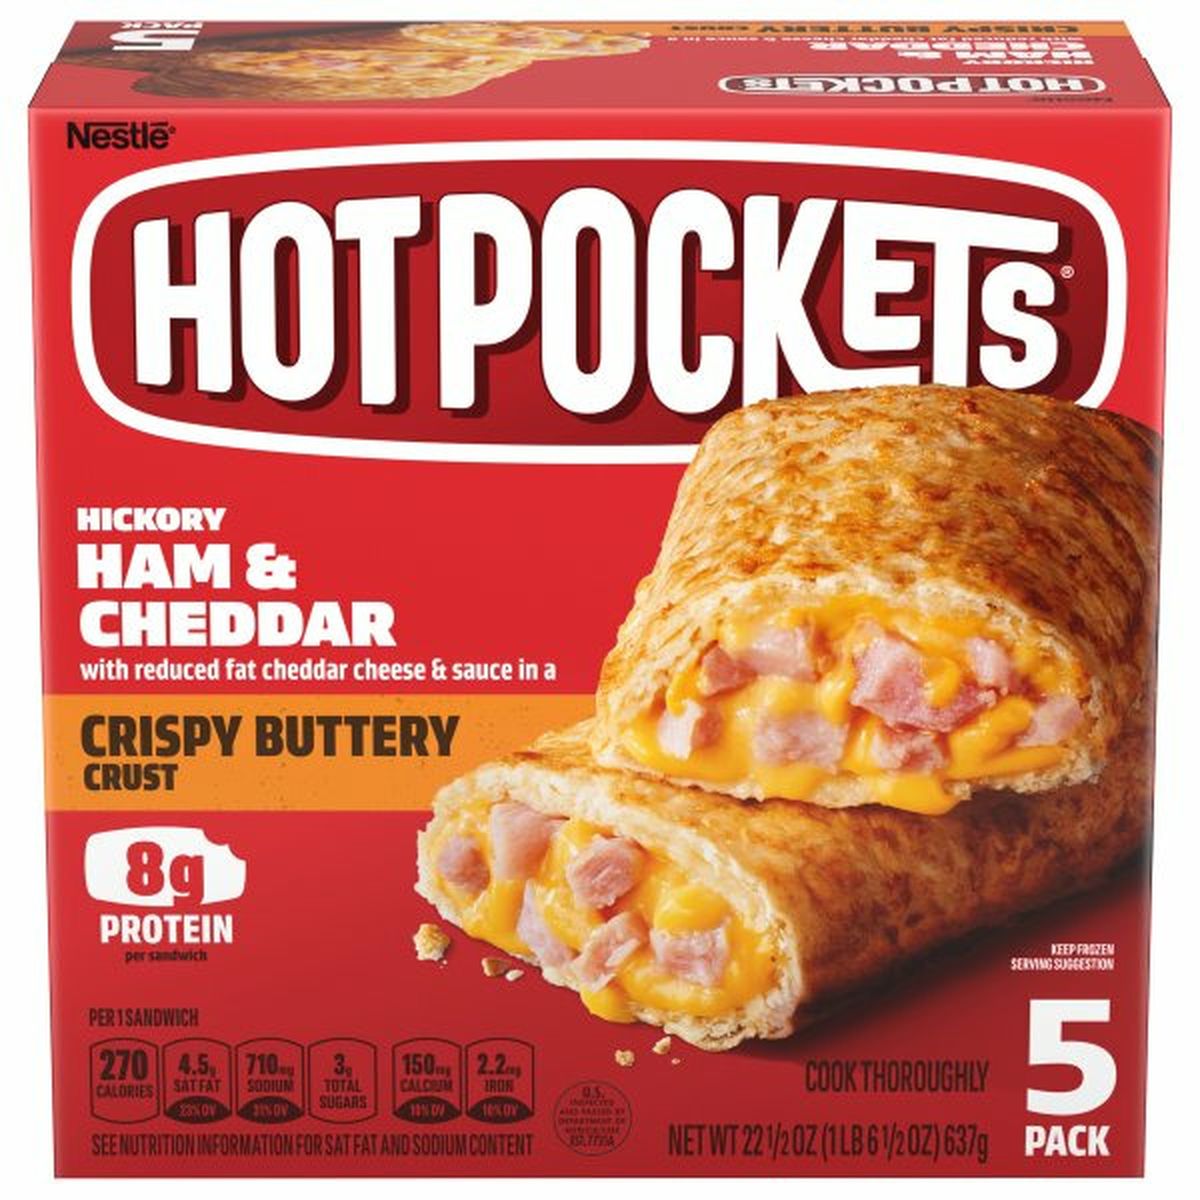 Calories in Hot Pockets Sandwiches, Hickory Ham & Cheddar, Crispy Butter Crust, 5 Pack